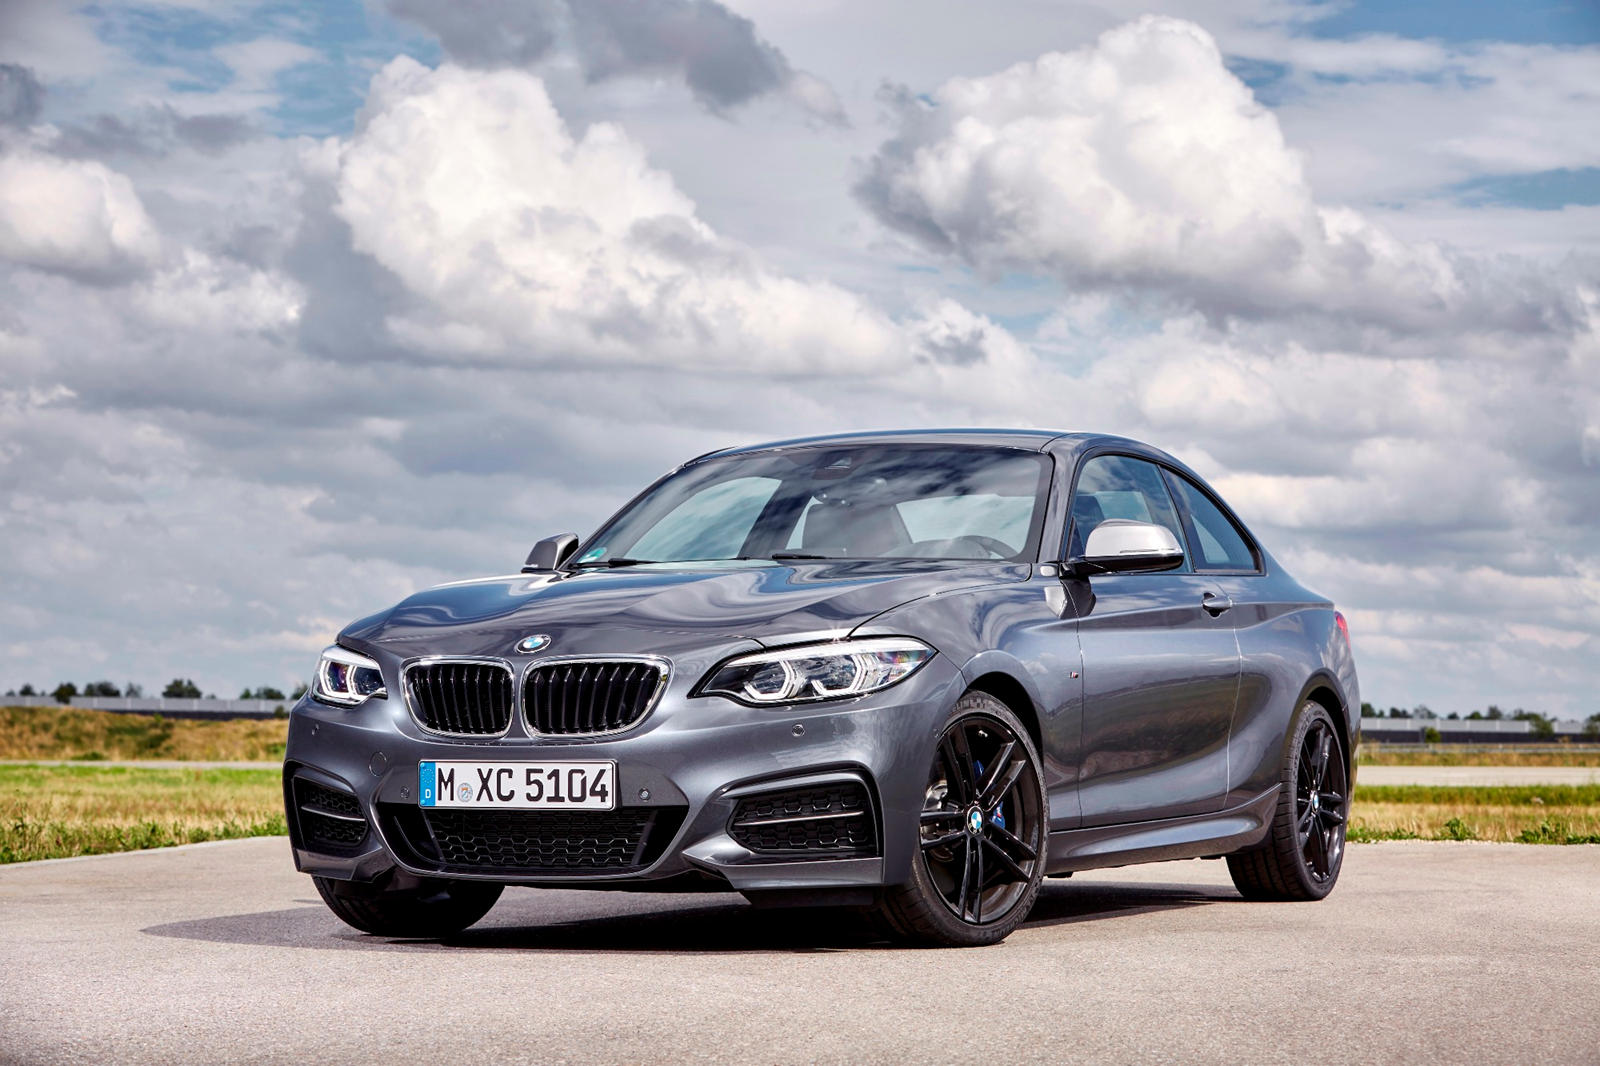 2019 BMW 2 Series Coupe: Review, Trims, Specs, Price, New Interior